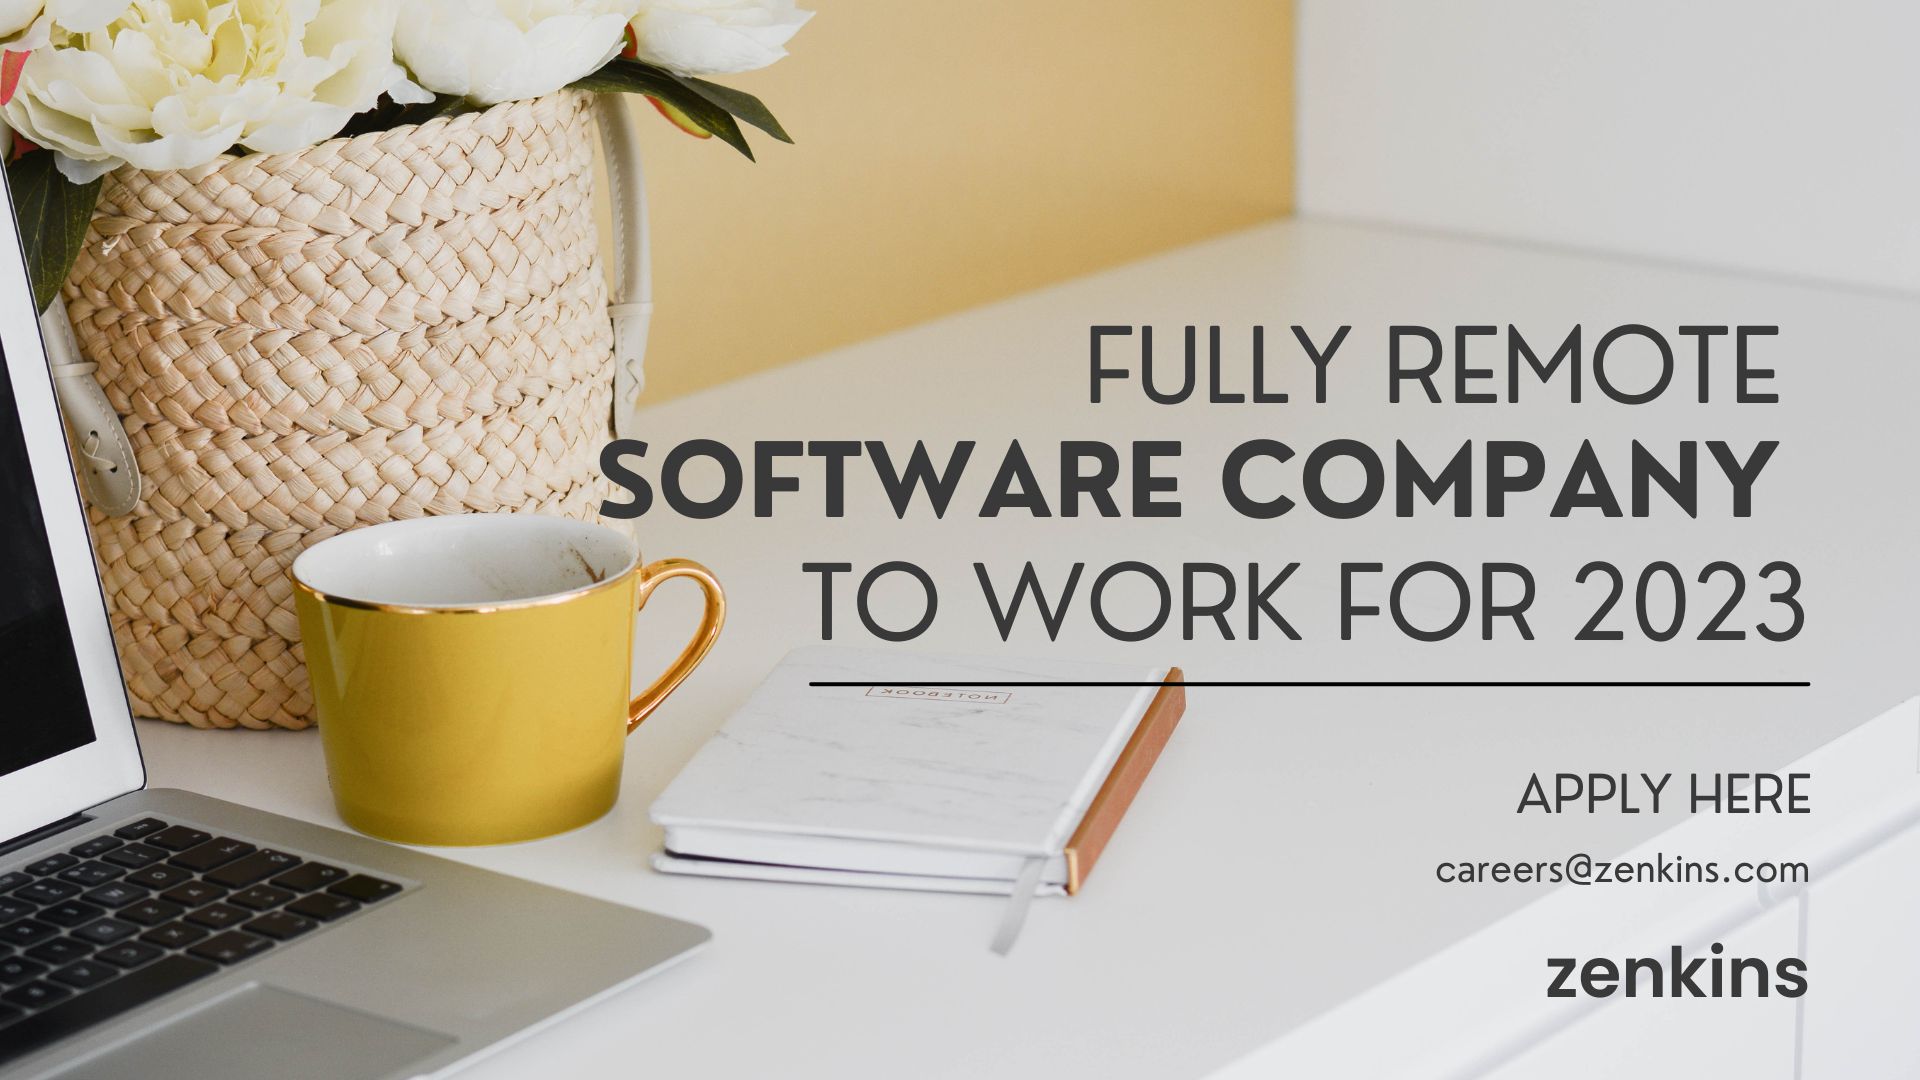 Fully remote software company to work for 2023